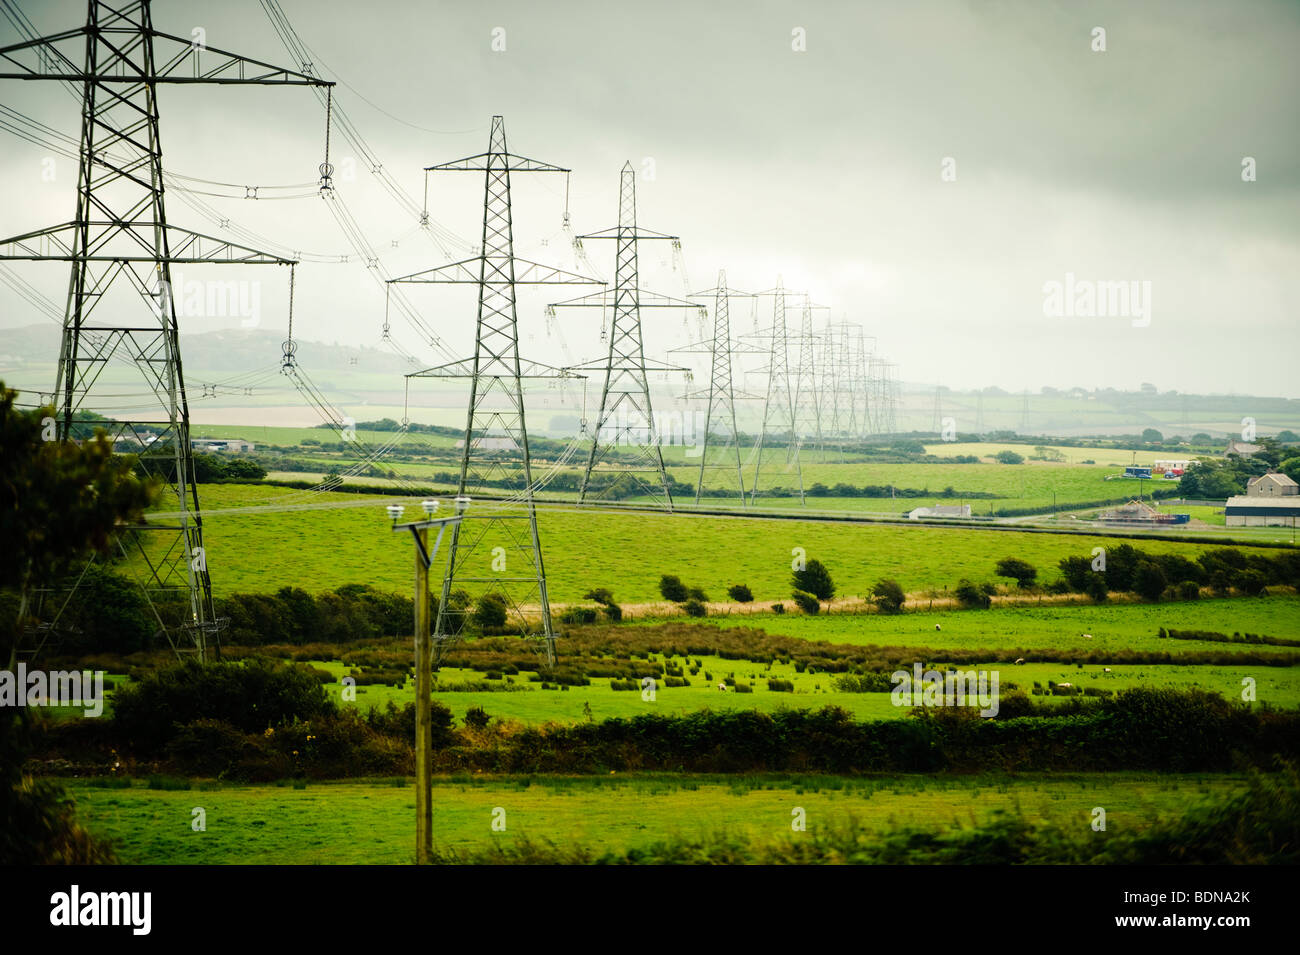 A line of National Grid Electricity pylons marching across the rural landscape of Anglesey, north wales UK Stock Photo